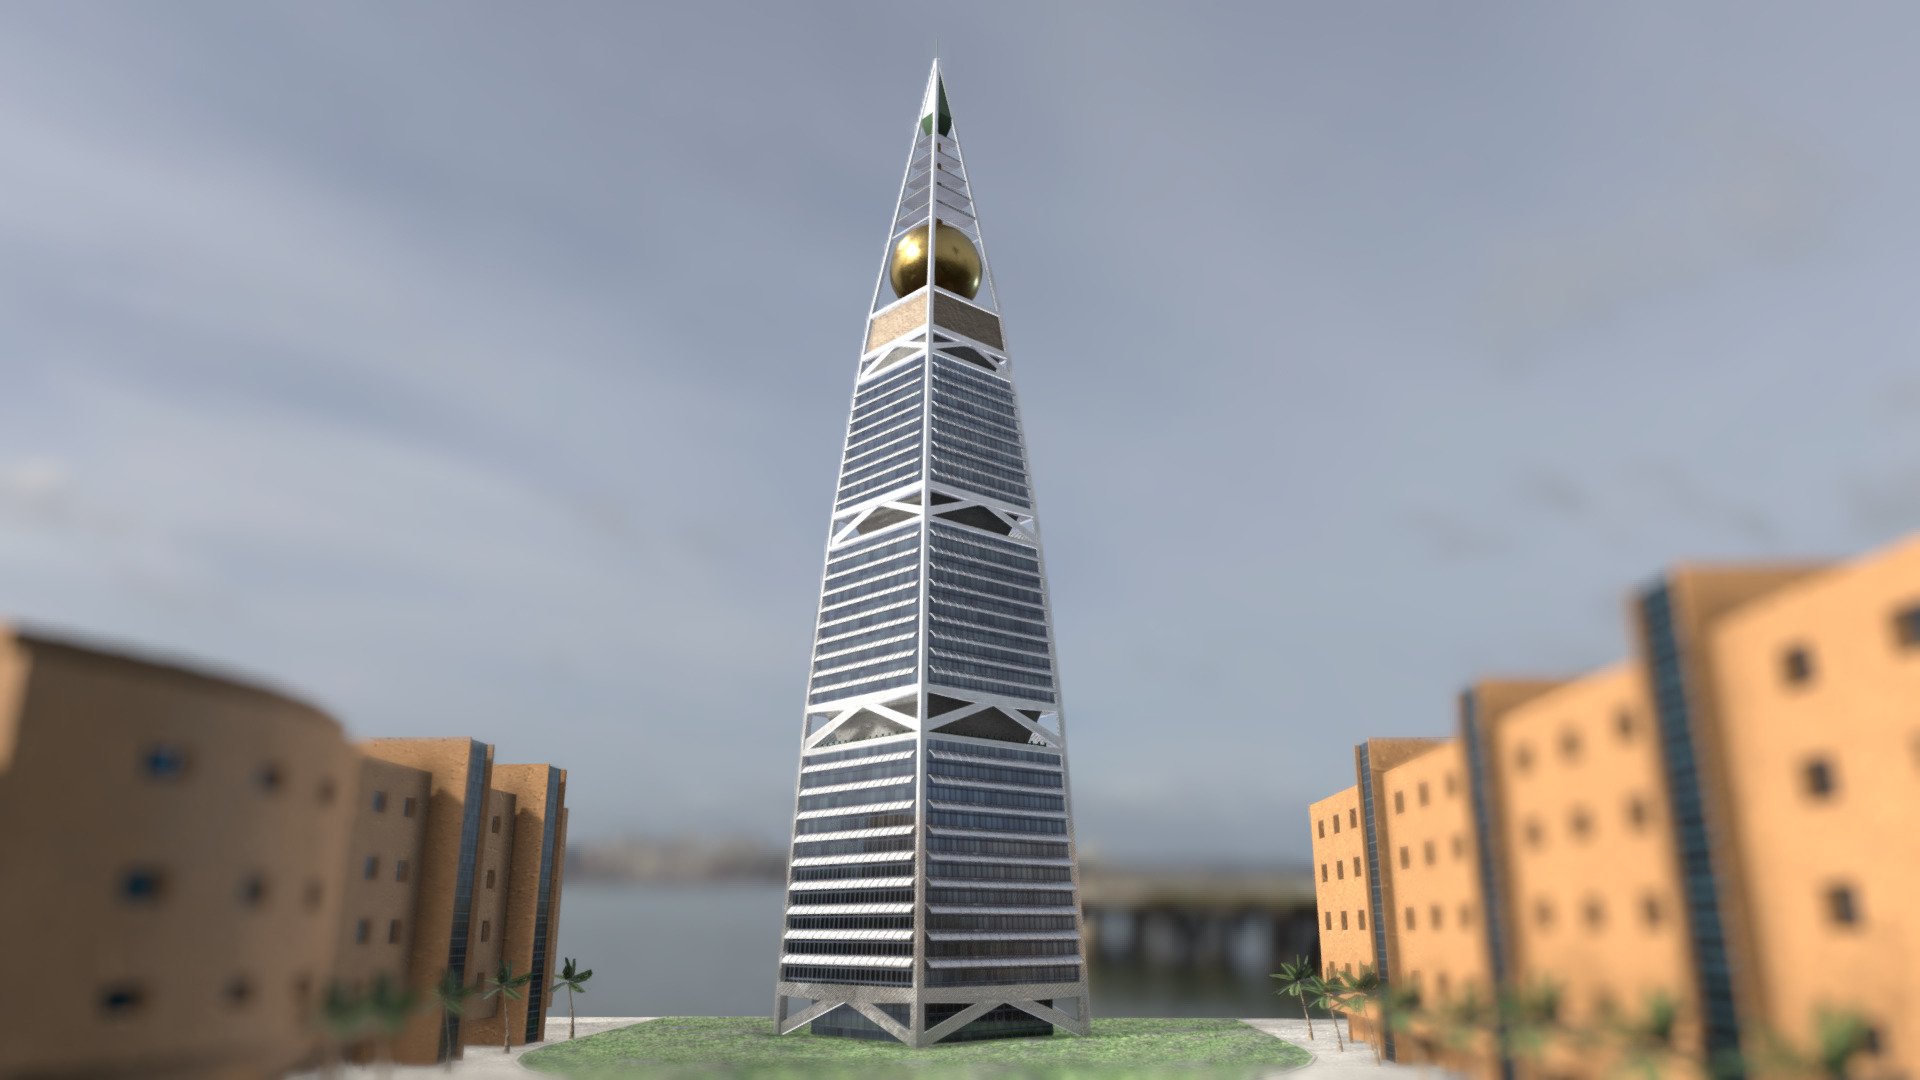 The Al Faisaliyah Centre (or Al Faisaliah Centre, Arabic: برج الفيصلية) is a commercial skyscraper and mixed-use complex located in the business district of Riyadh, Saudi Arabia. The 267-metre-high office tower

Low Poly 3d Model ready for AR, Game, and VR PBR Texture with 2K Resolution - Al Faisaliyah Tower Skyscraper Low Poly - Buy Royalty Free 3D model by cuankiproduction 3d model